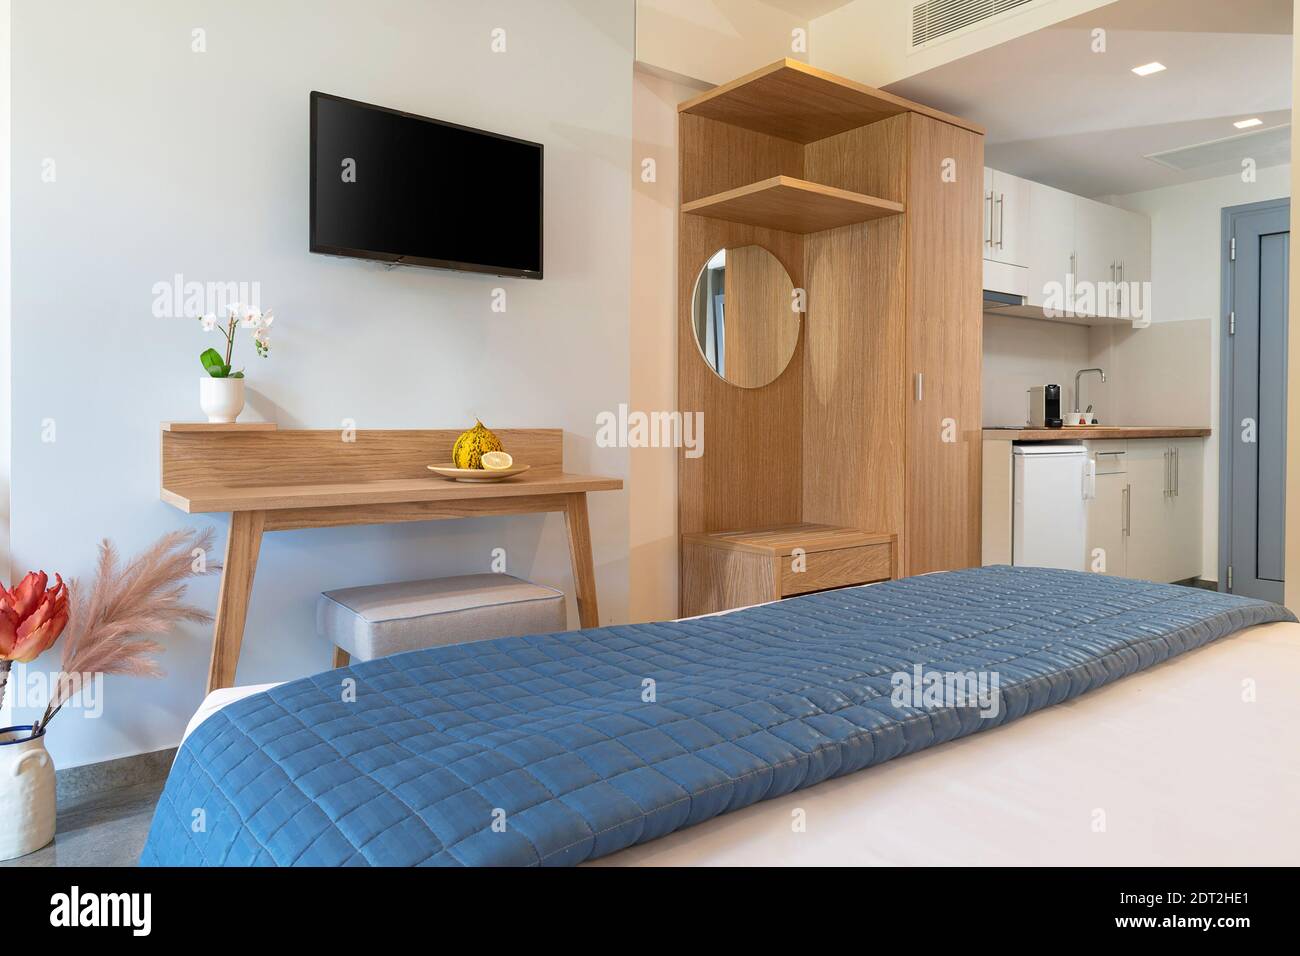 Modern style interior of small studio apartment. Hotel room with white kitchen, blue bedroom, pine wooden wardrobe, flat TV in single space Stock Photo